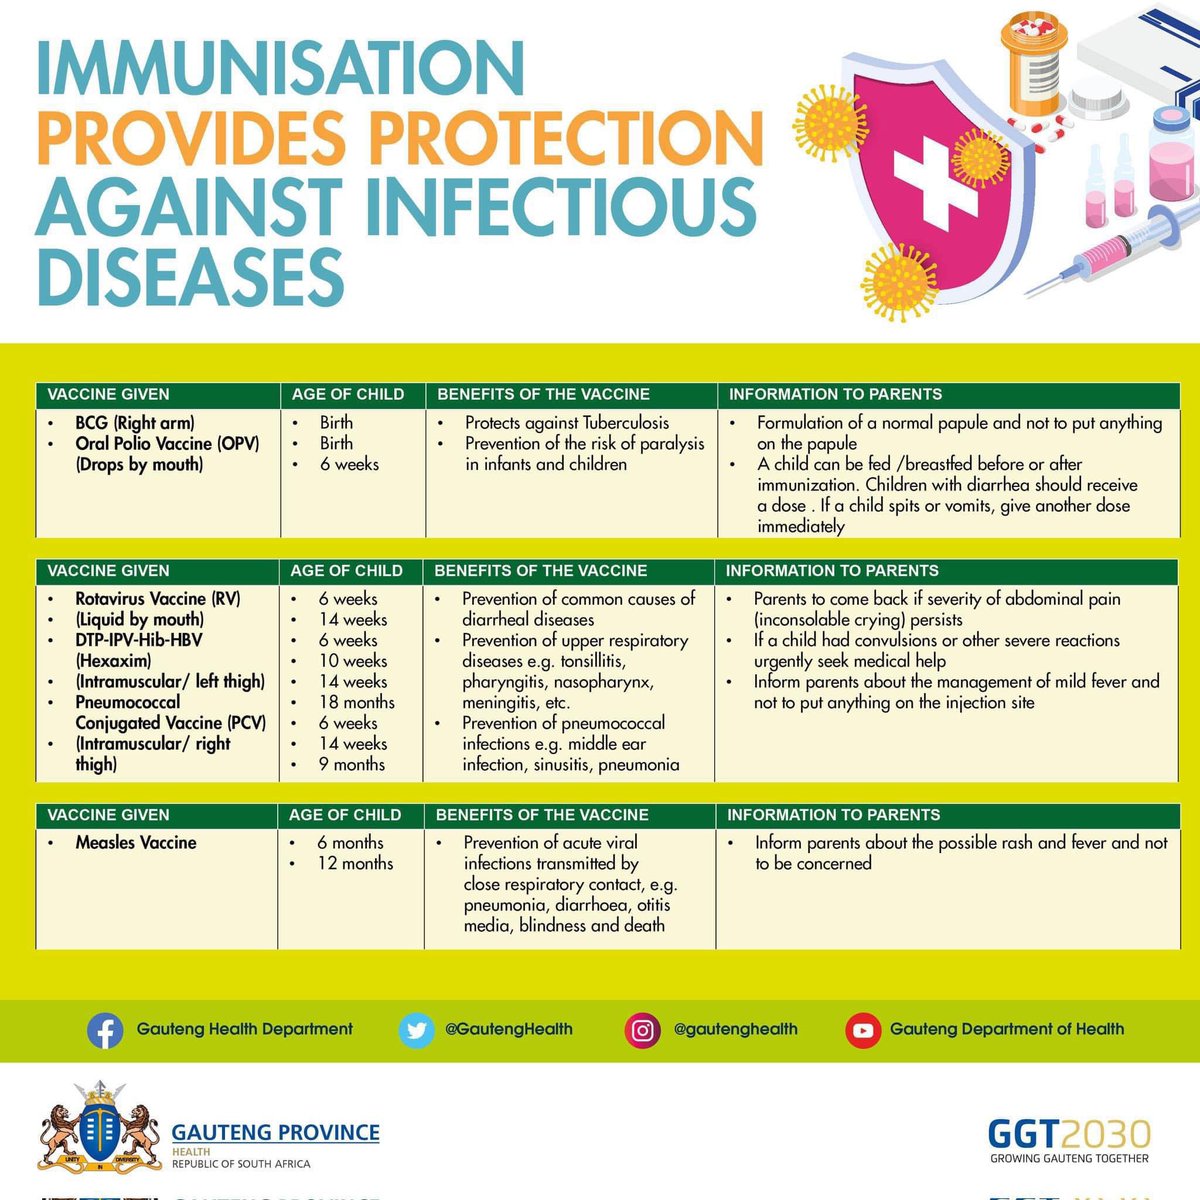 Parents, ensure that your little ones are immunised at regular ages as set out in the road to health care booklet (EPI schedule) to protect them against diseases such as polio, tuberculosis, hepatitis, measles, and meningitis #Immunisation #AsibeHealthyGP